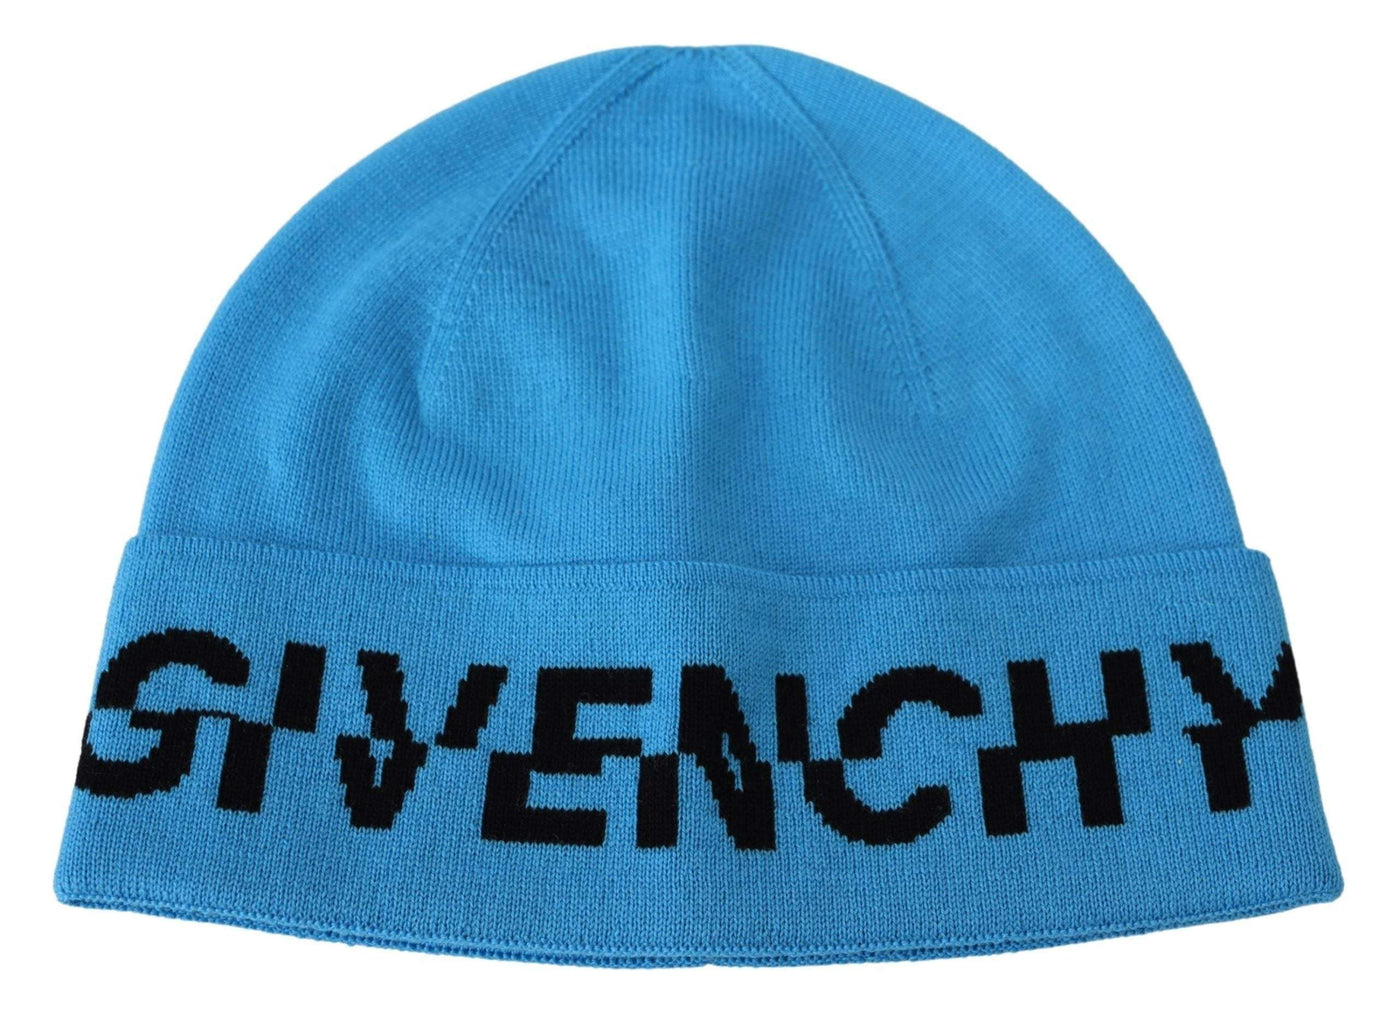 GIVENCHY Blue Wool Hat Logo Winter Warm Beanie Unisex Hat #women, Accessories - New Arrivals, Blue, feed-agegroup-adult, feed-color-blue, feed-gender-female, feed-size-58 cm|M, feed-size-OS, Gender_Women, GIVENCHY, Hats & Caps - Men - Accessories, Hats - Women - Accessories at SEYMAYKA